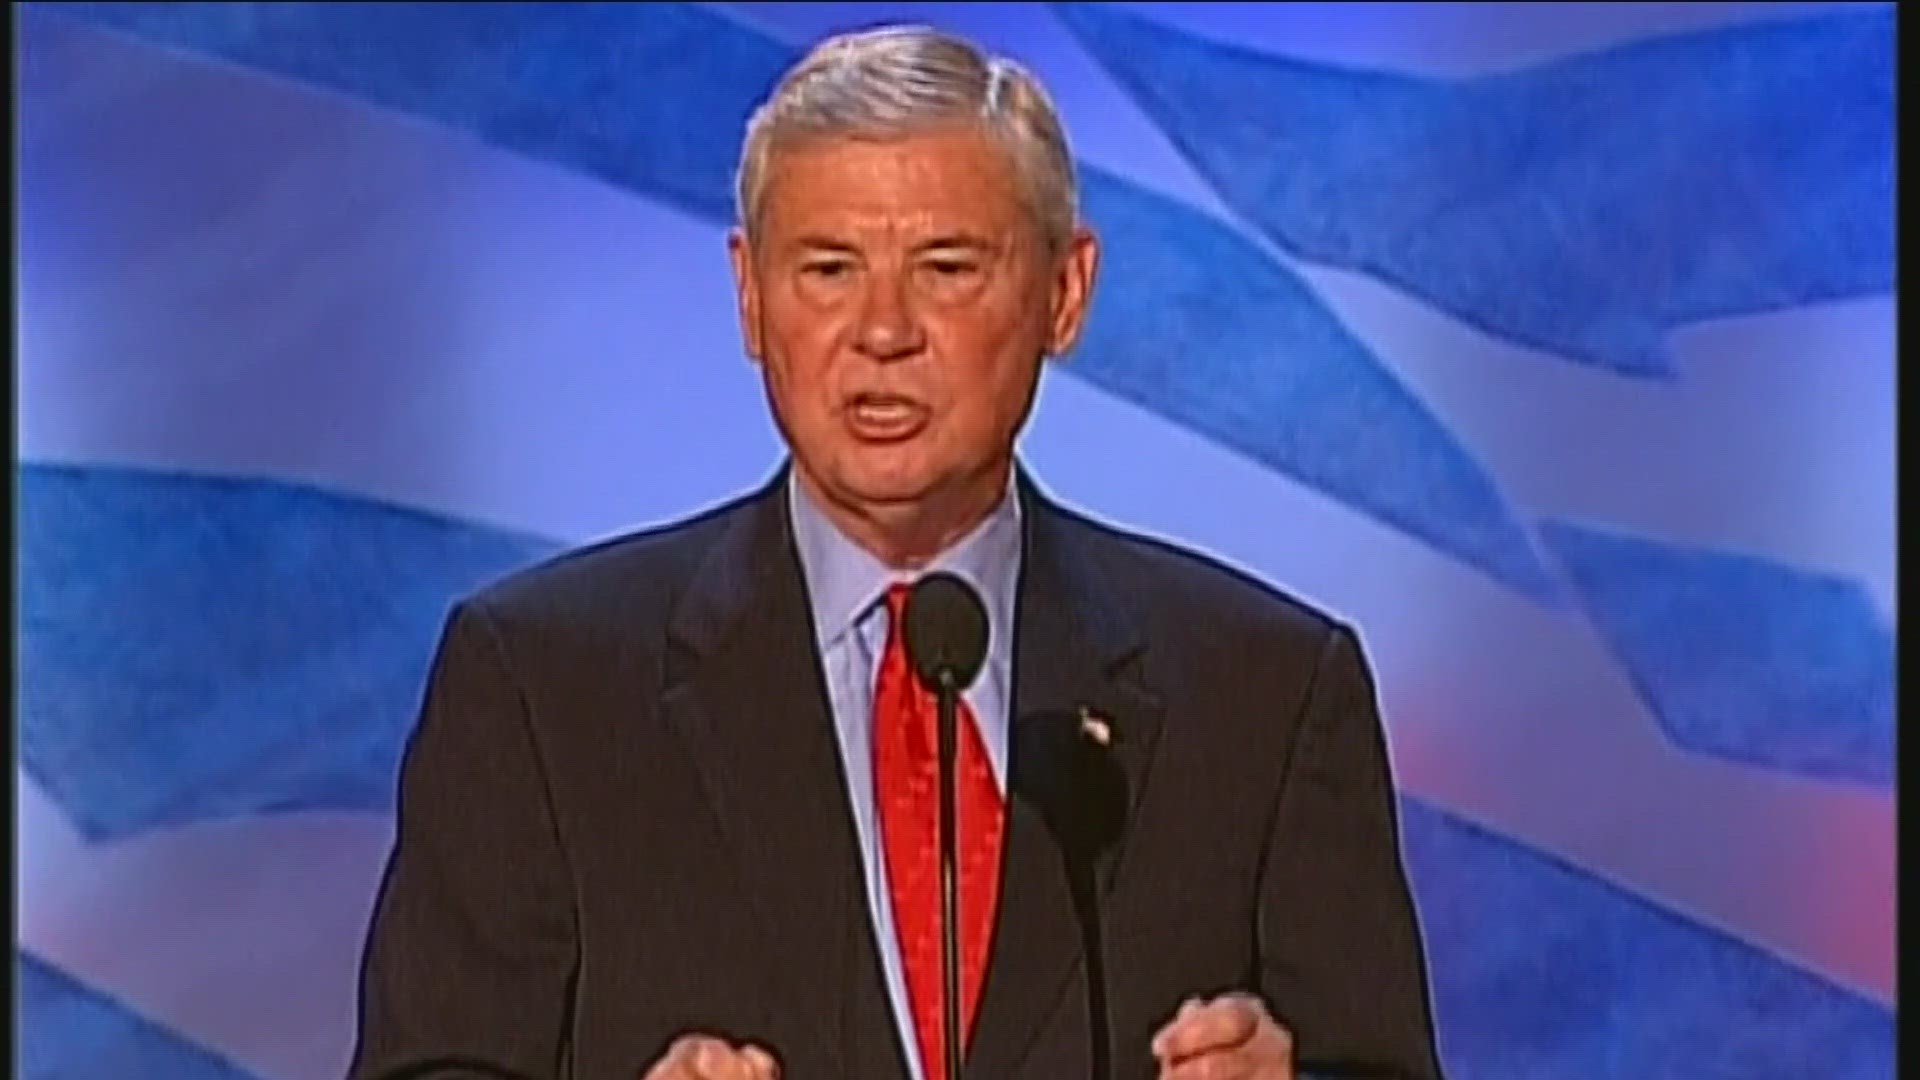 Local, state and national leaders are remembering the life of former Florida Governor Bob Graham. His family announced his death last night. He was 87 years old.